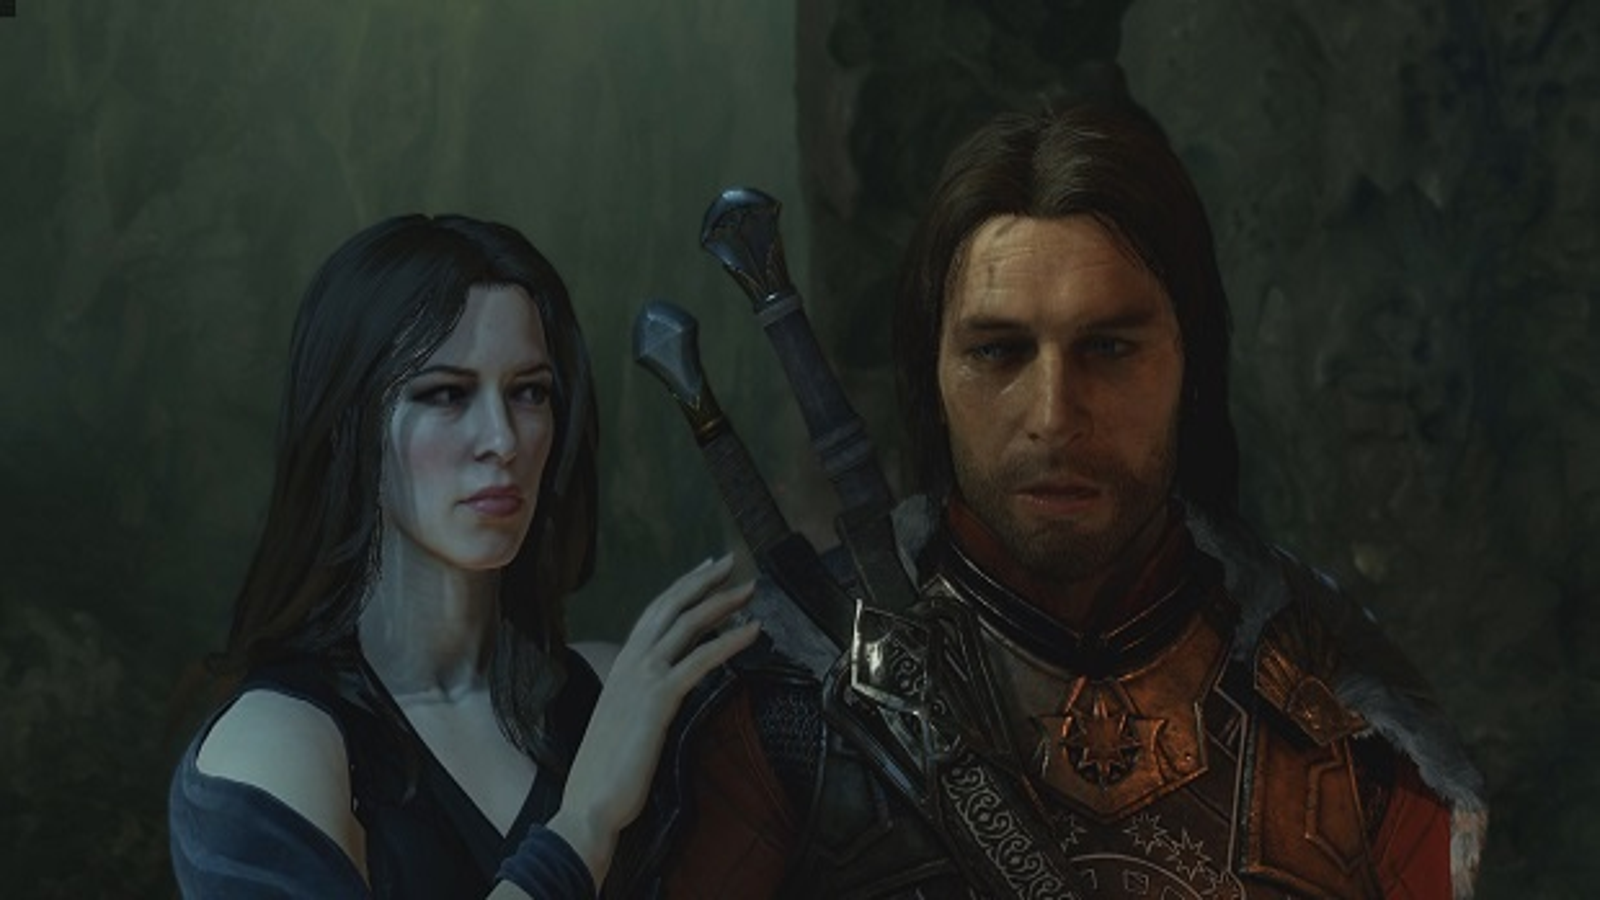 Push Square: PS4 Game Of The Year 2014 - Middle-earth: Shadow of